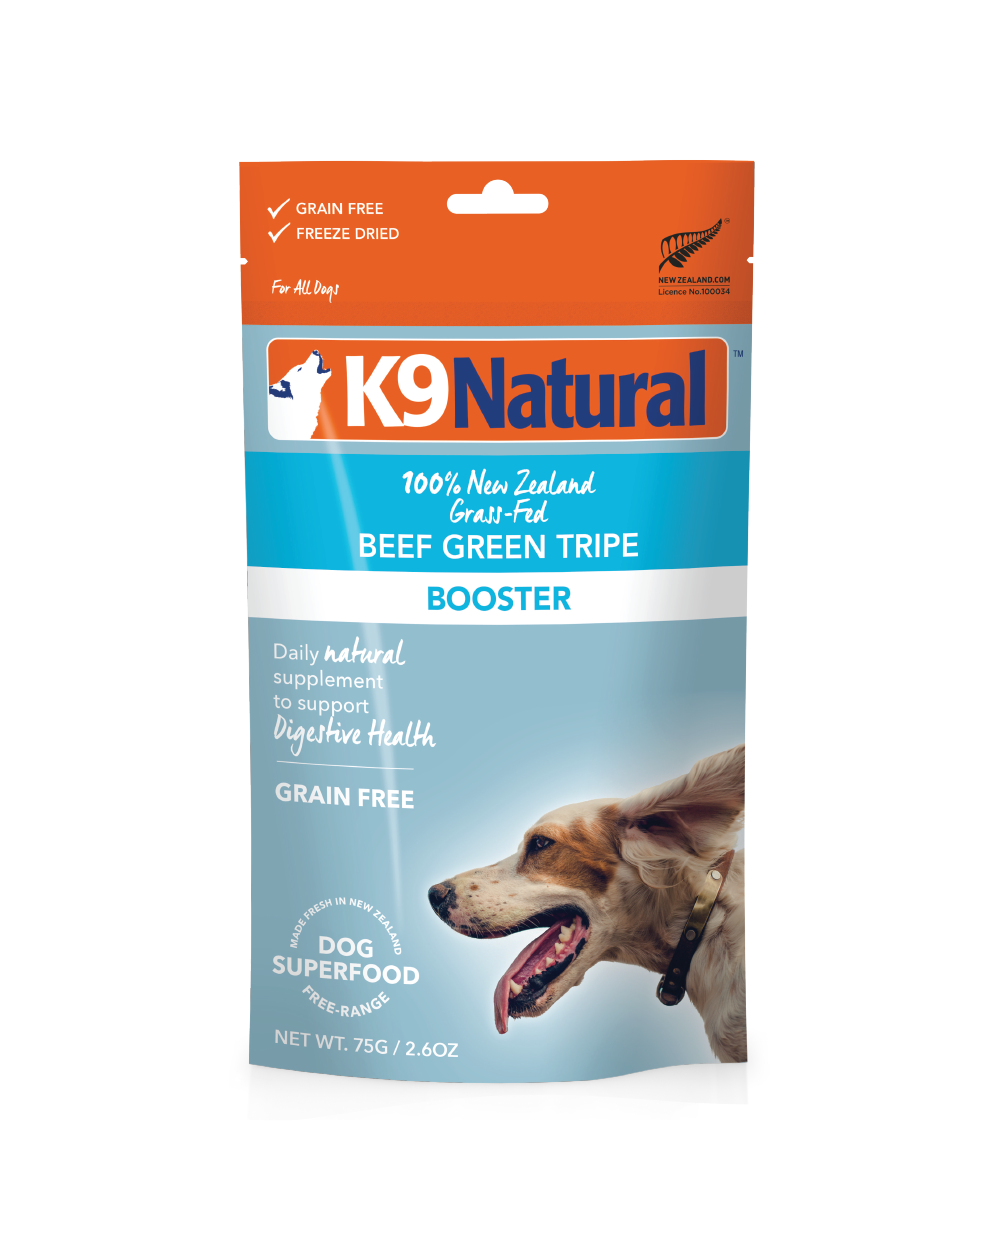 K9 Natural - Beef Green Tripe Freeze-Dried Dog Food Booster-ARMOR THE POOCH